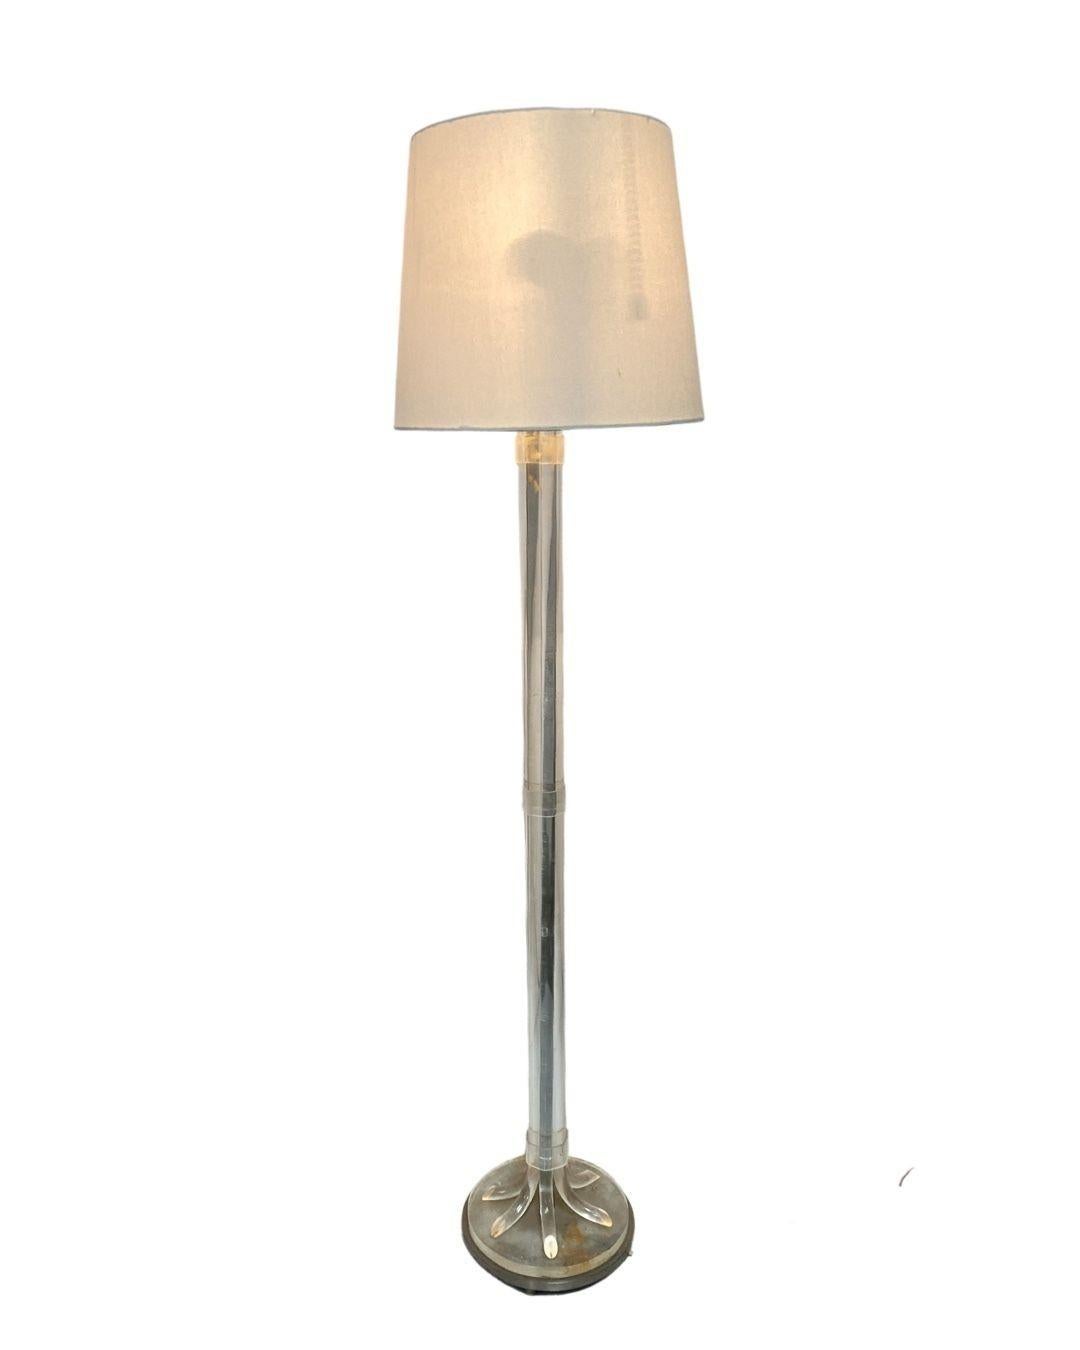 American Hollywood Regency Lucite and Chrome Floor Lamp For Sale